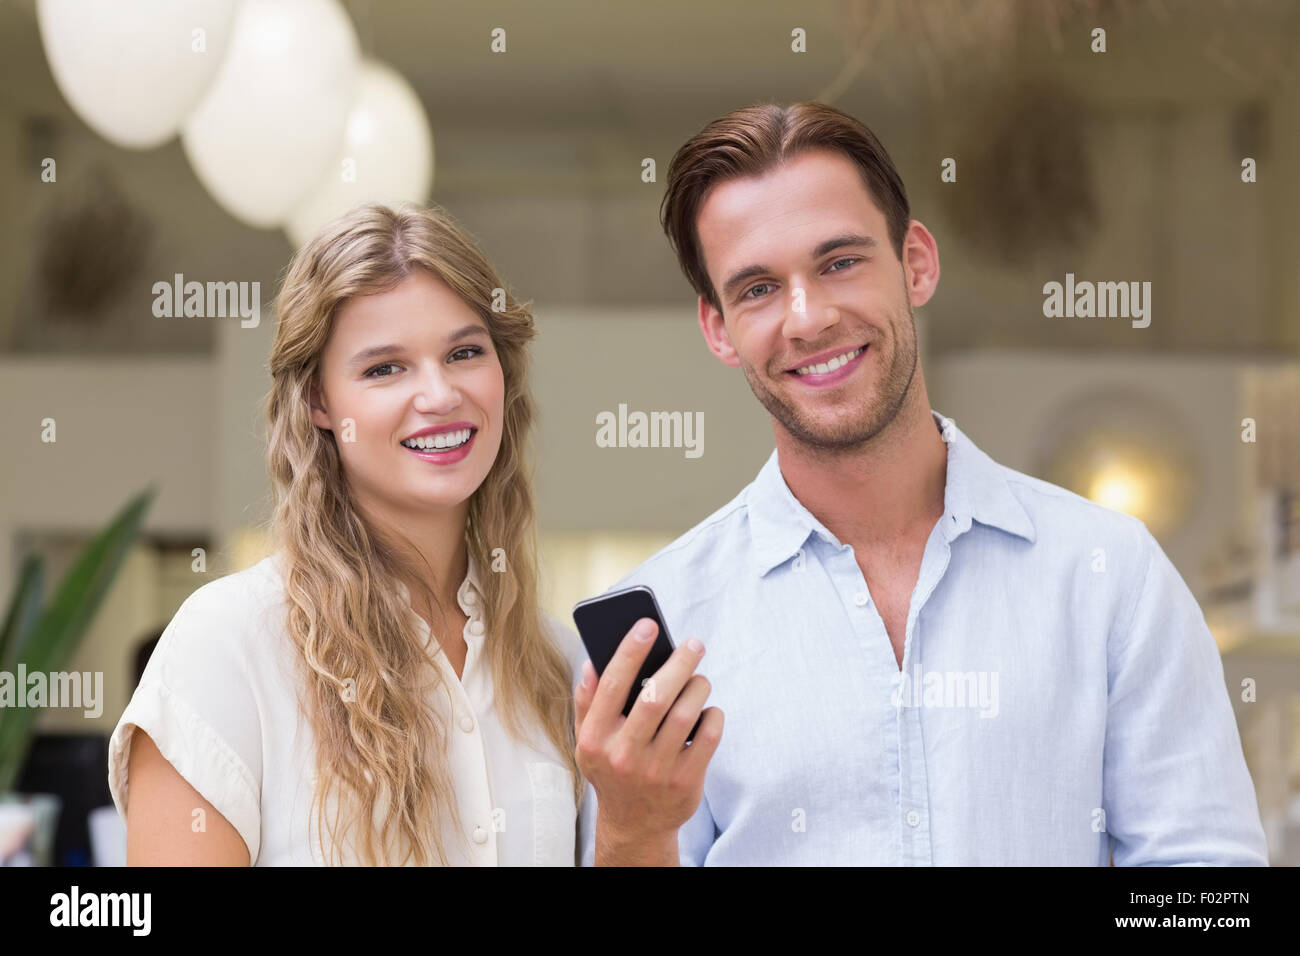 Portrait of a happy couple looking at smartphone Stock Photo